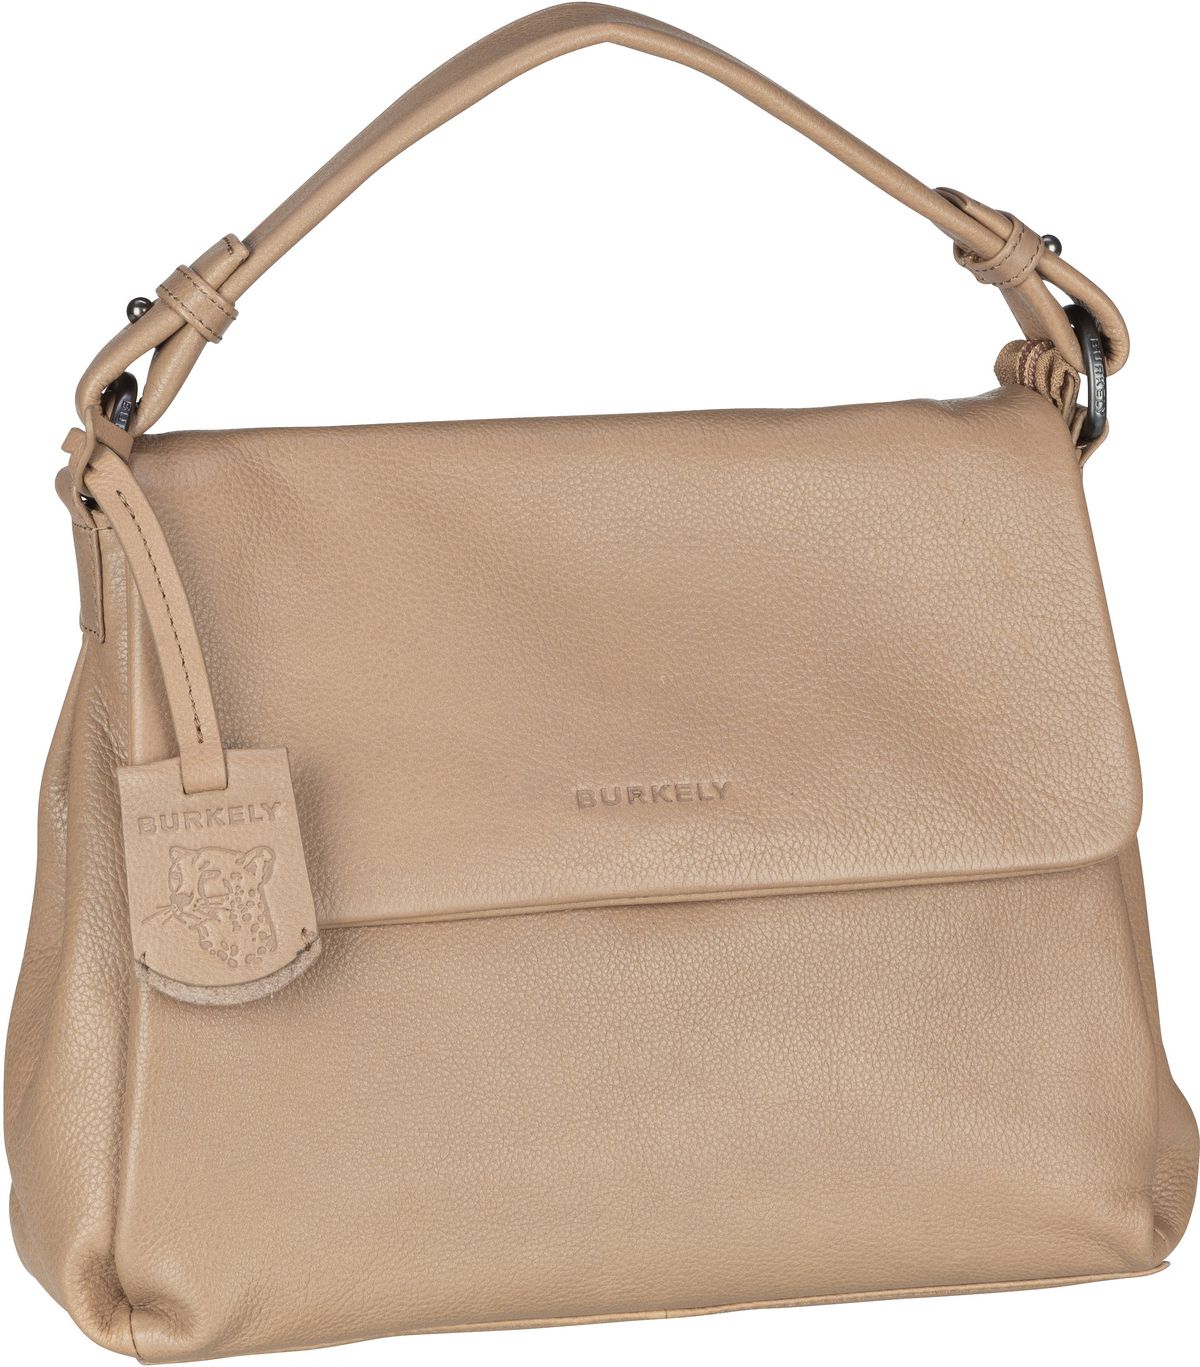 Burkely Just Jolie Citybag - Taupe